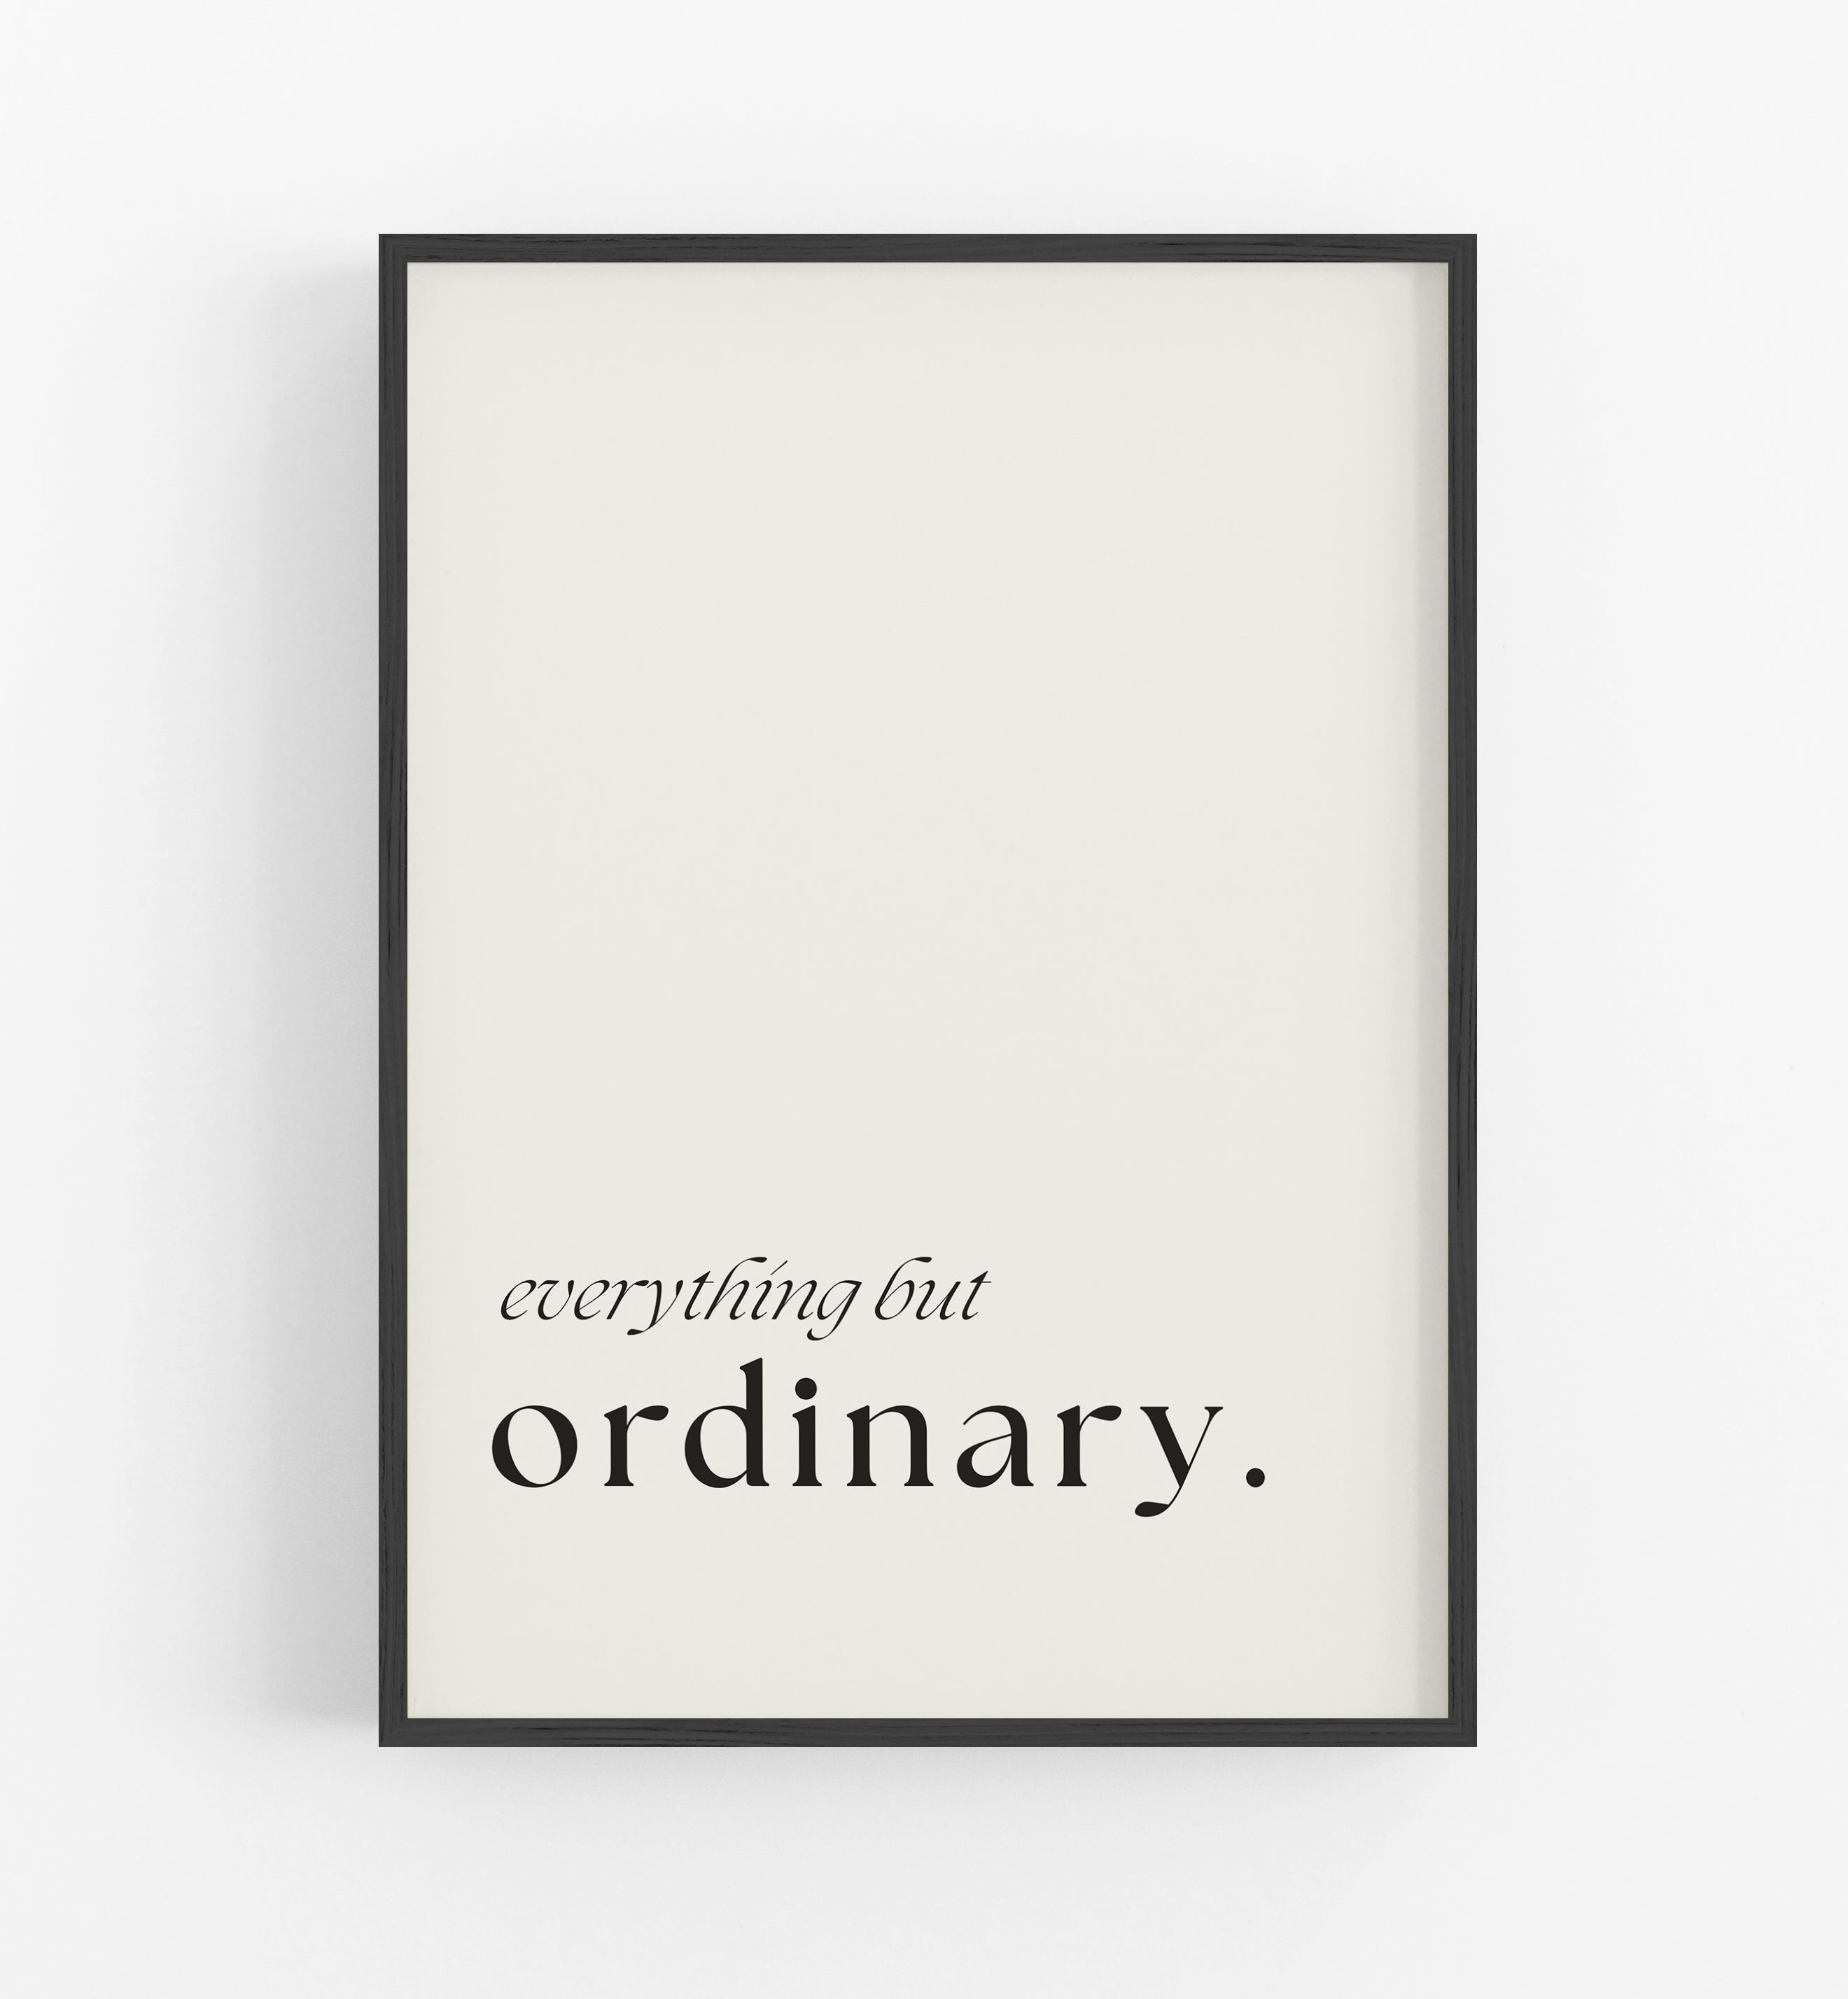 But Ordinary